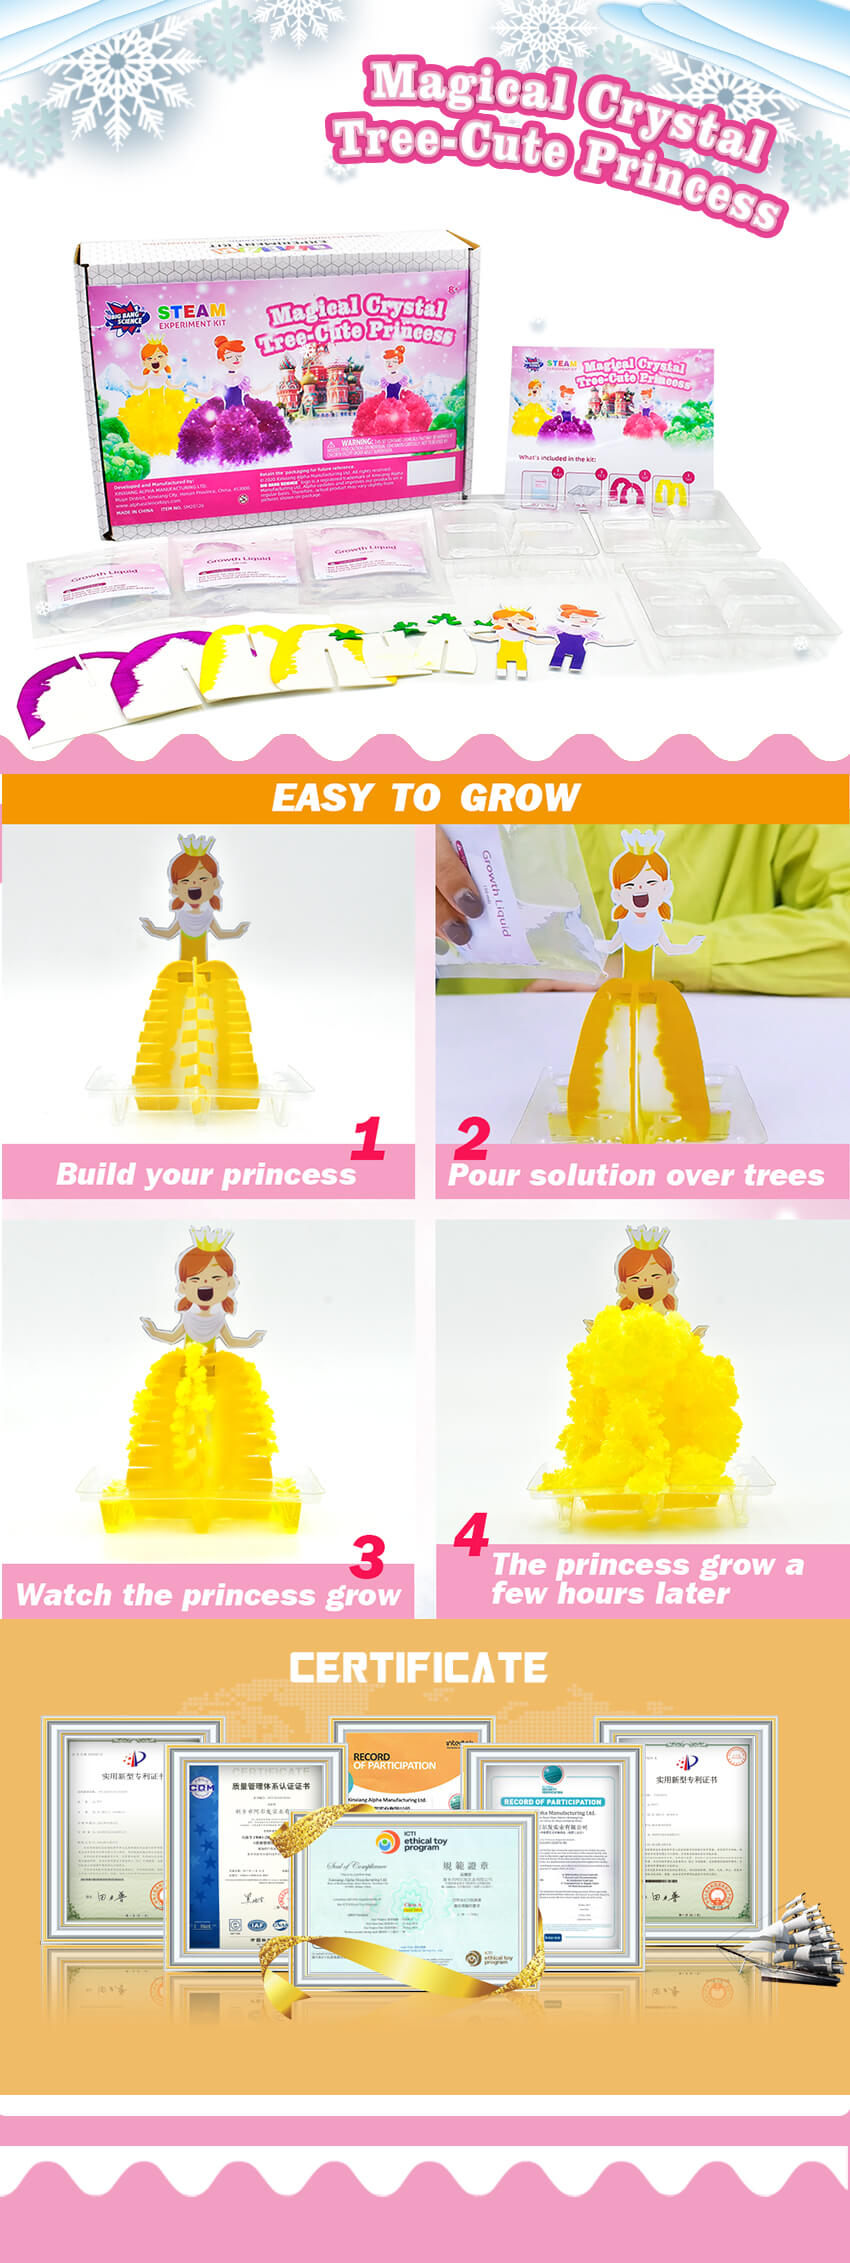 Magical-Crystal-Tree-Cute-Princess-Product-details